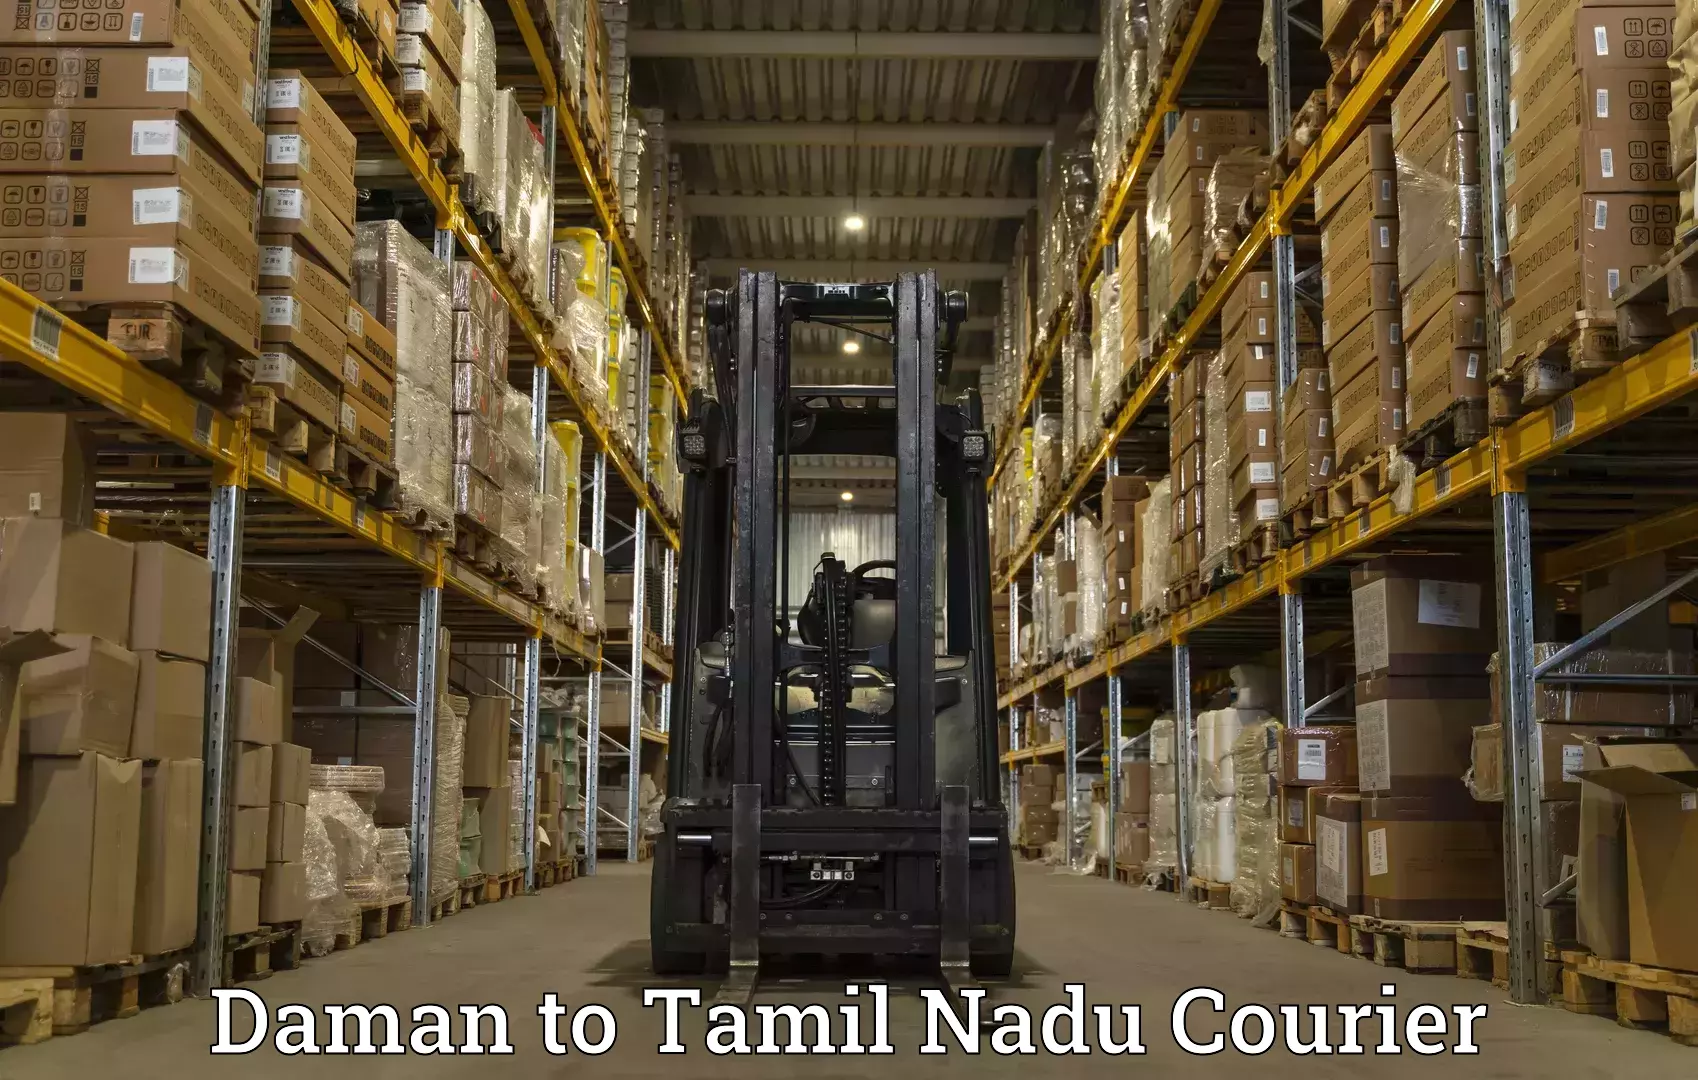 Courier rate comparison Daman to Ennore Port Chennai